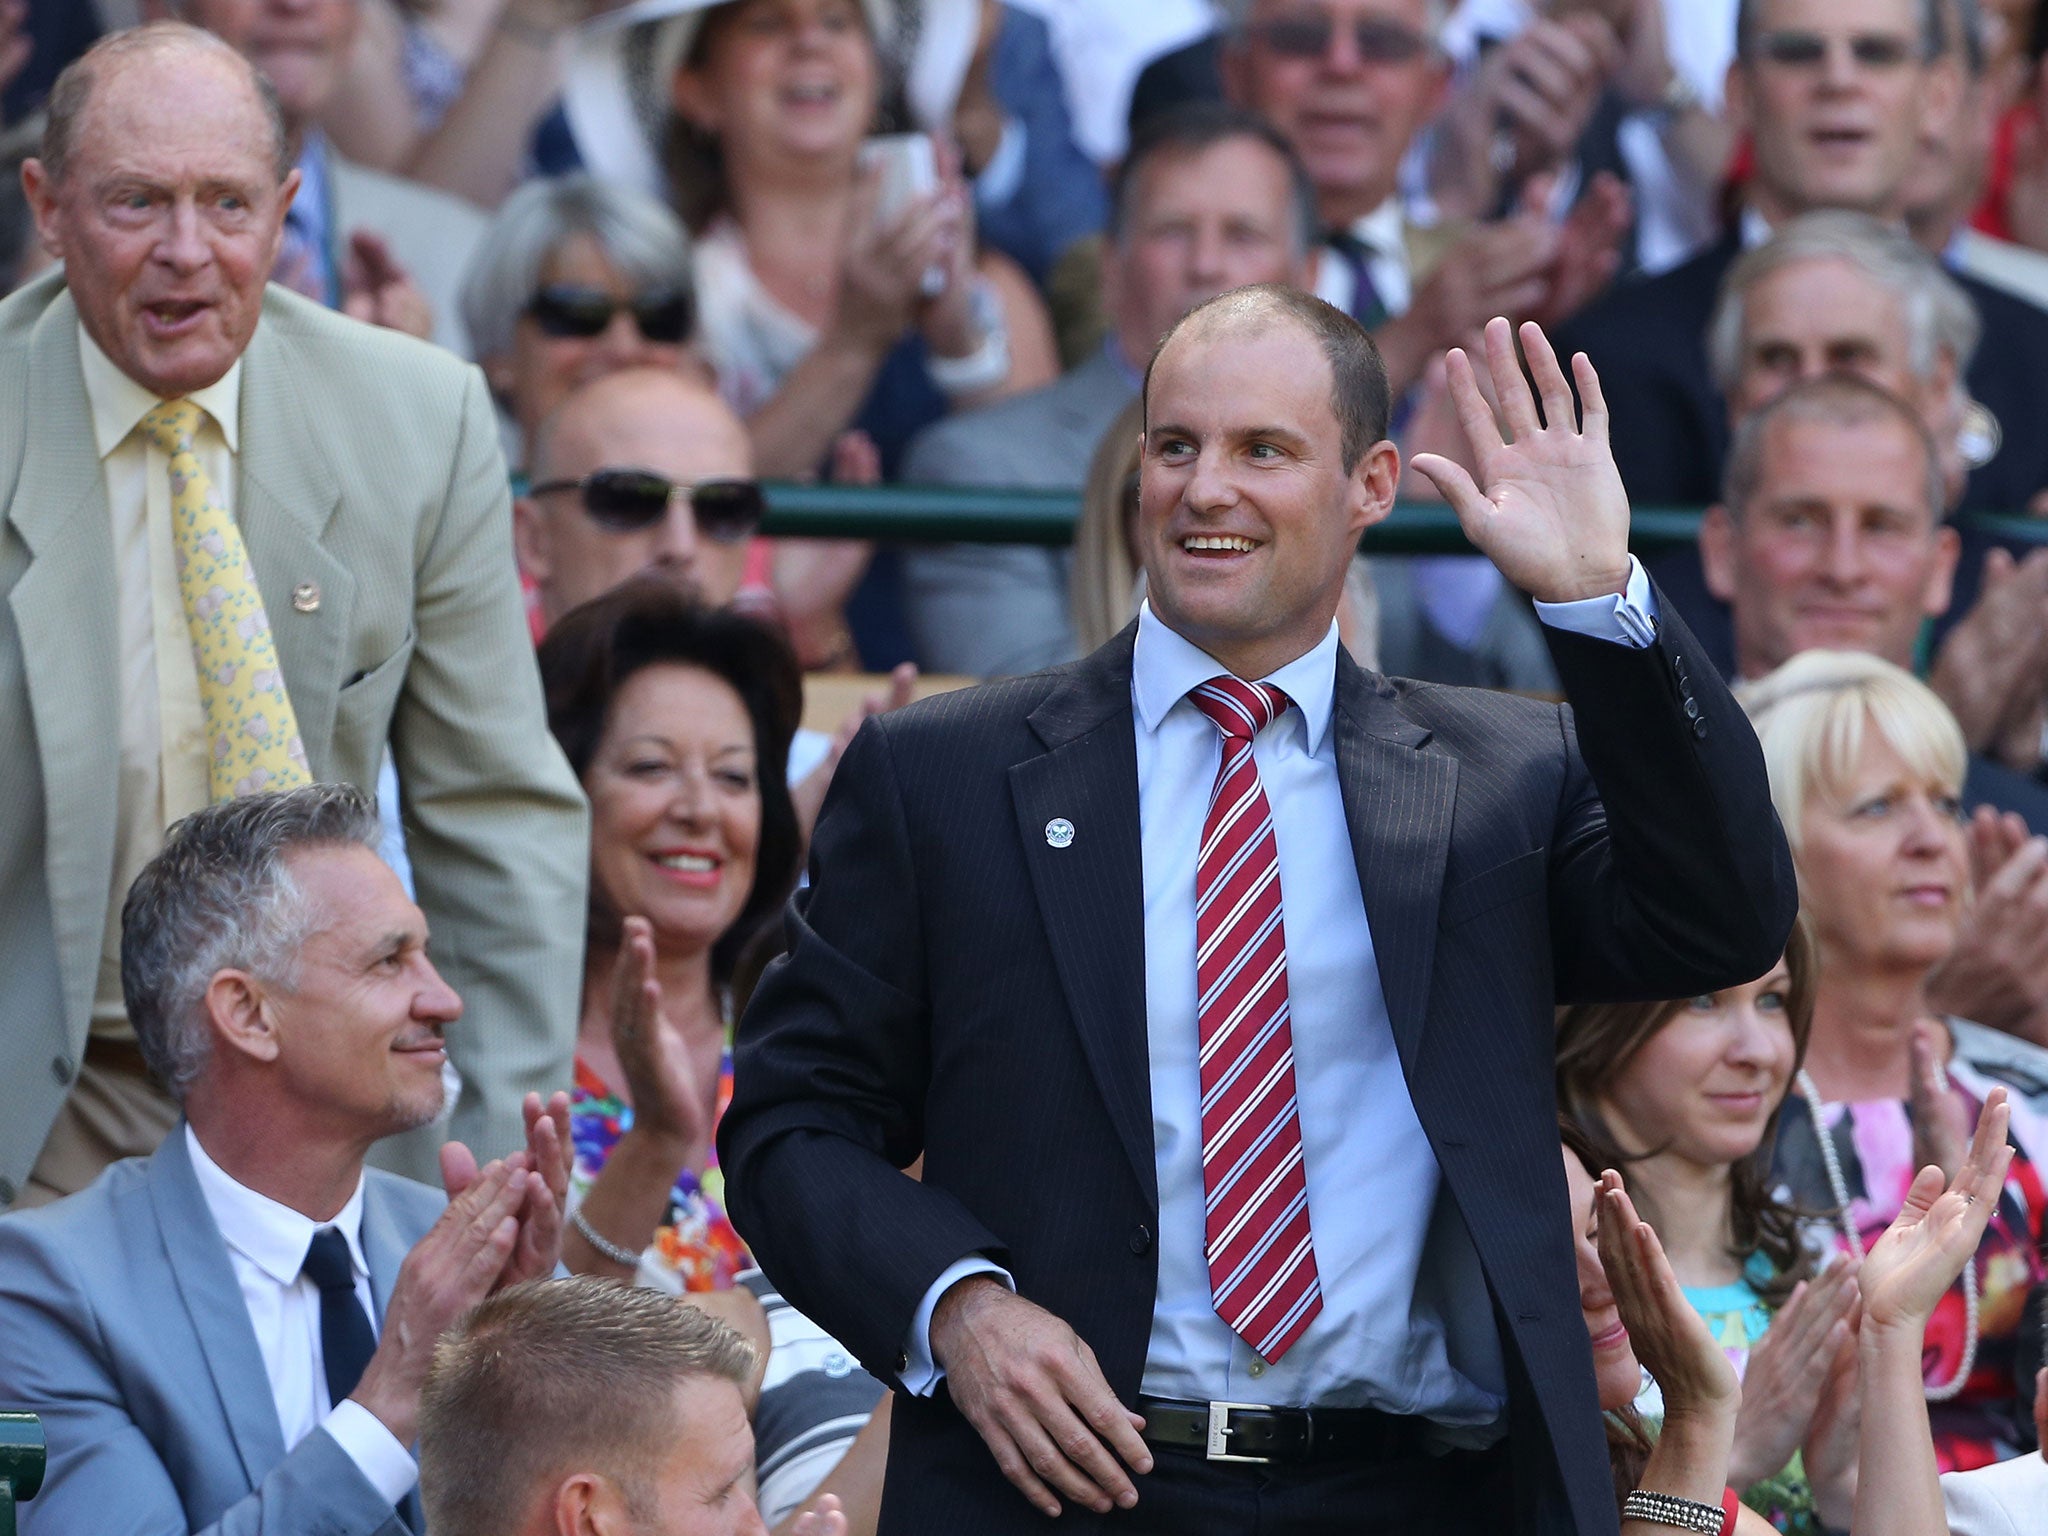 Andrew Strauss’s distinct strategy for England’s Test and one-day sides helped regain the Ashes